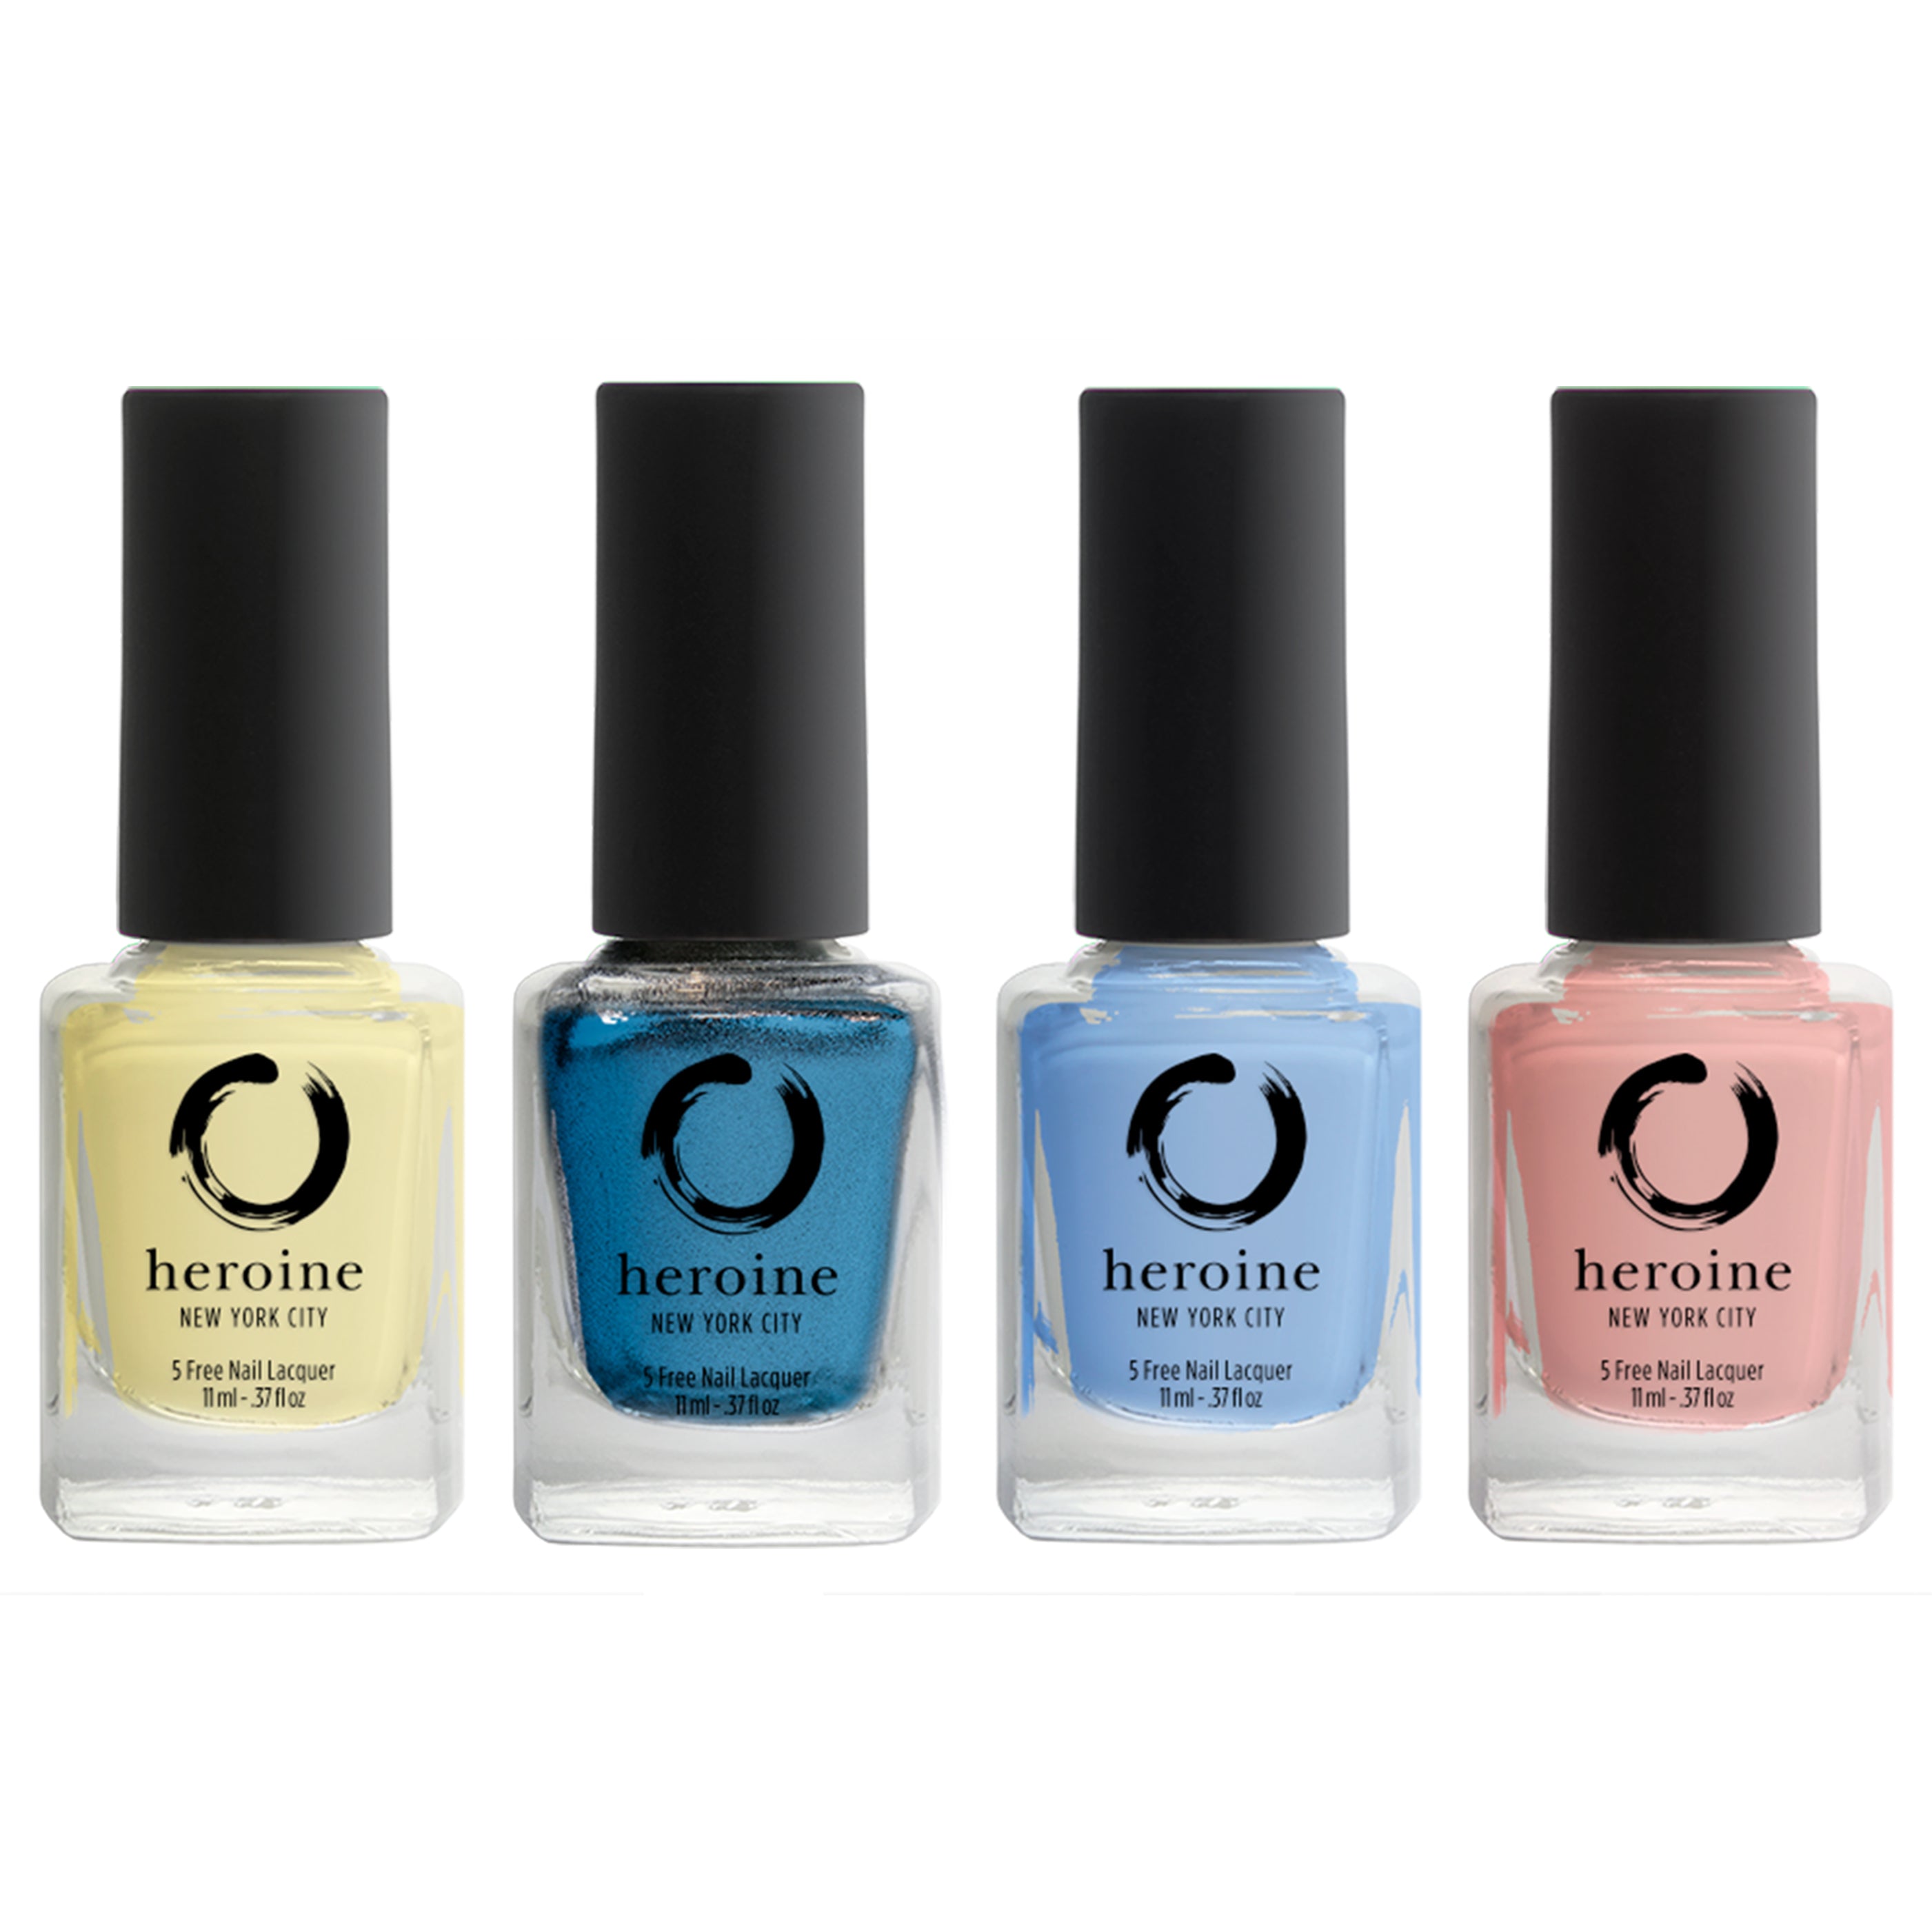 summer nail polish set | The Summer Delights by heroine.nyc